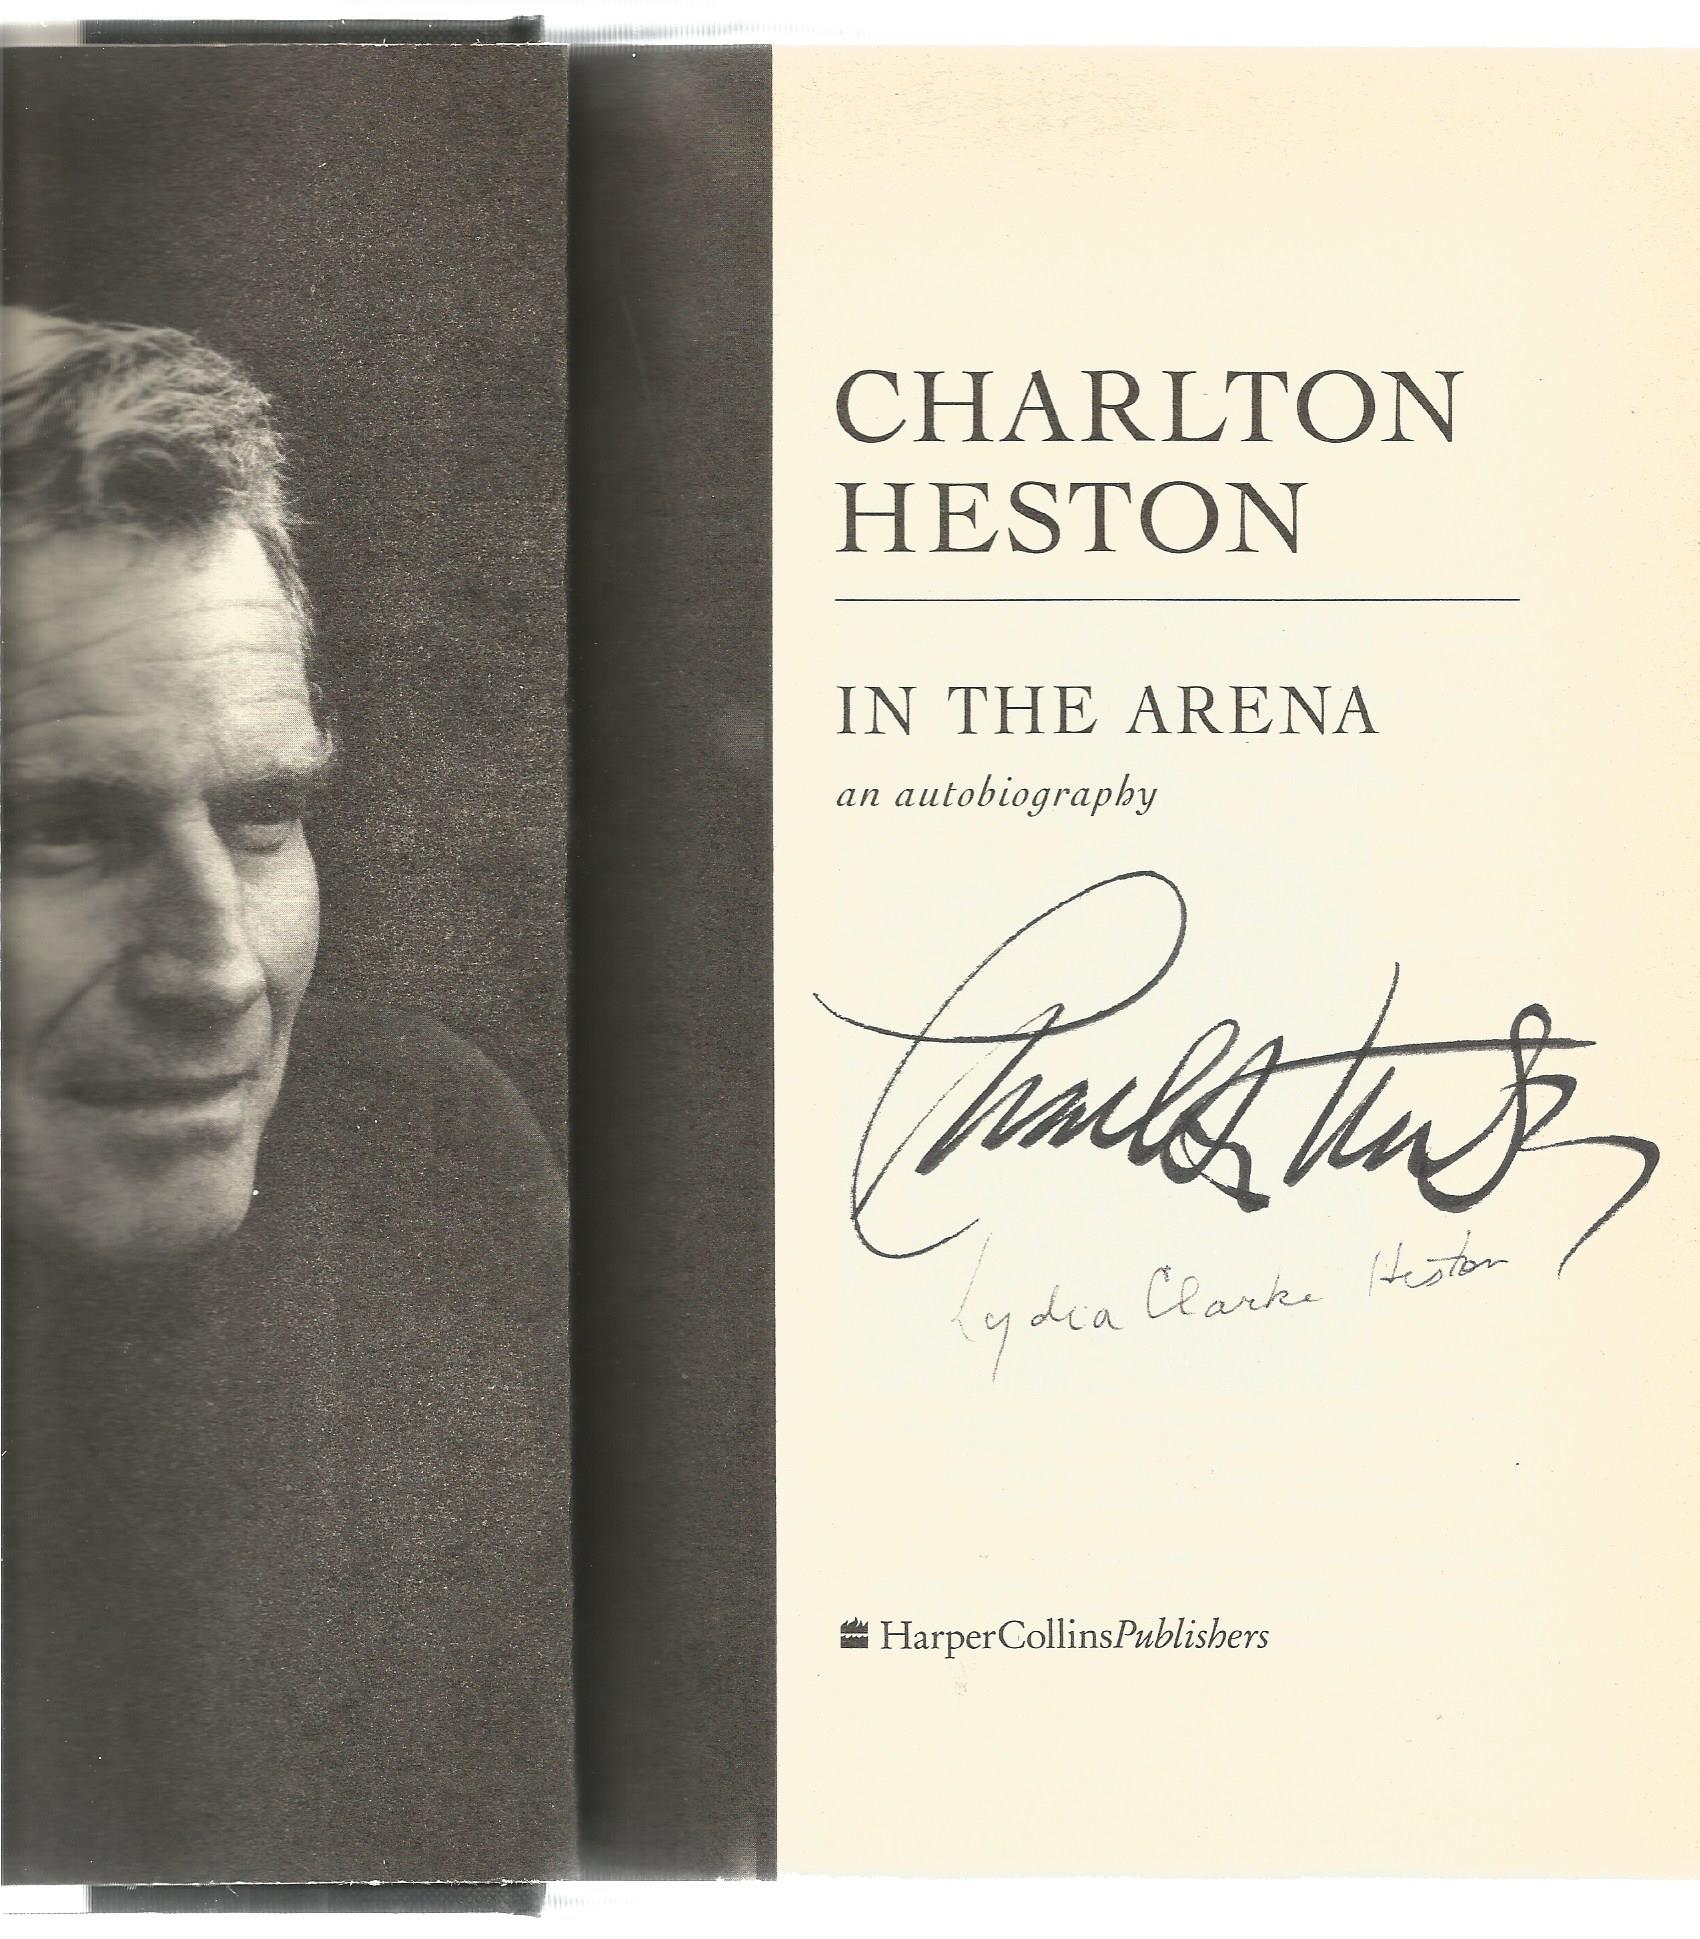 Charlton Heston hardback book titled In the Arena The Autobiography signed on the inside title